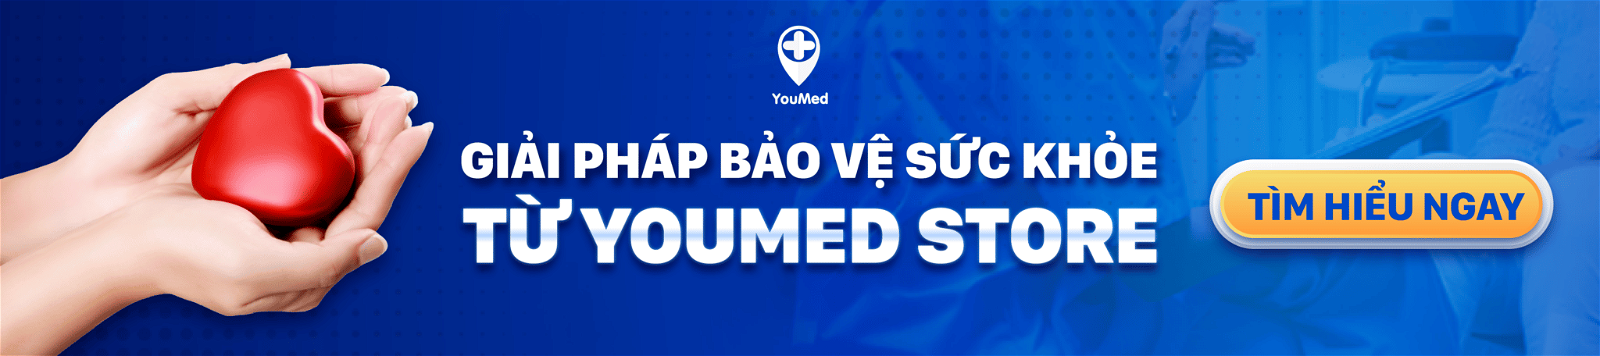 YouMed Store Shopee